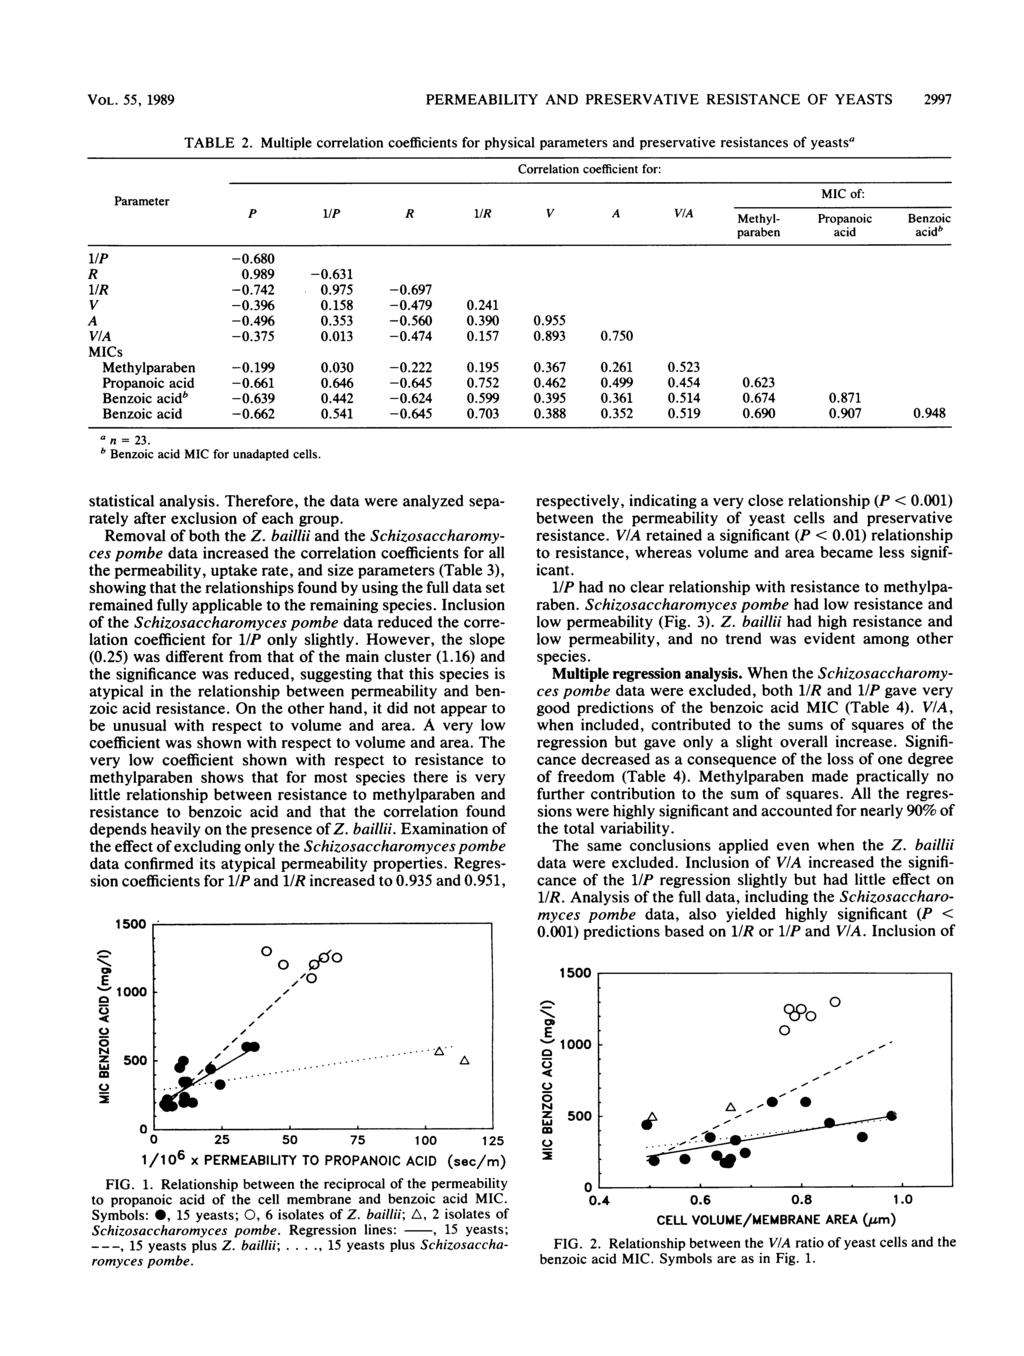 1 wz...-''--''a''t 1~~ VOL. 55, 1989 PERMEABILITY AND PRESERVATIVE RESISTANCE OF YEASTS 2997 TABLE 2.